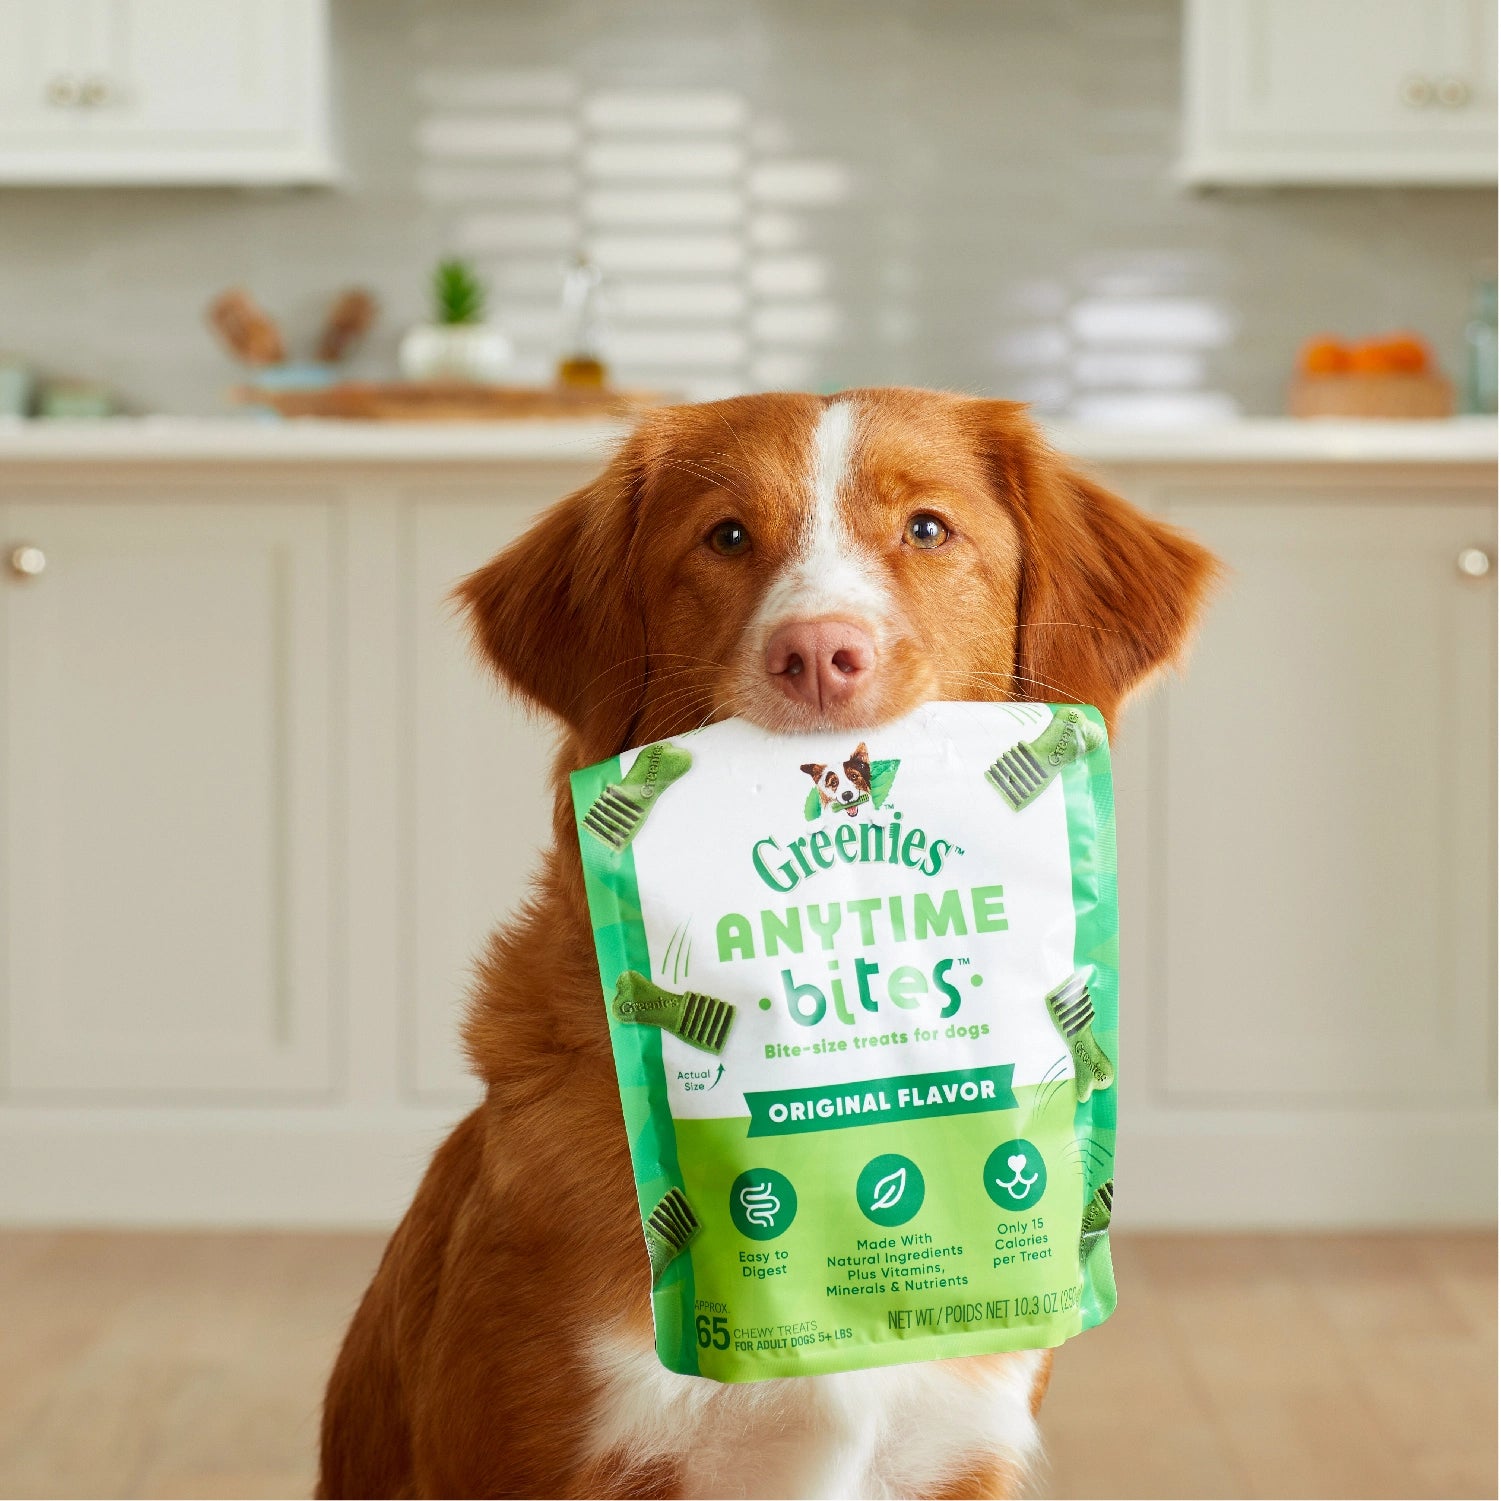 Dog with a bag of GREENIES ANYTIME BITES in its mouth